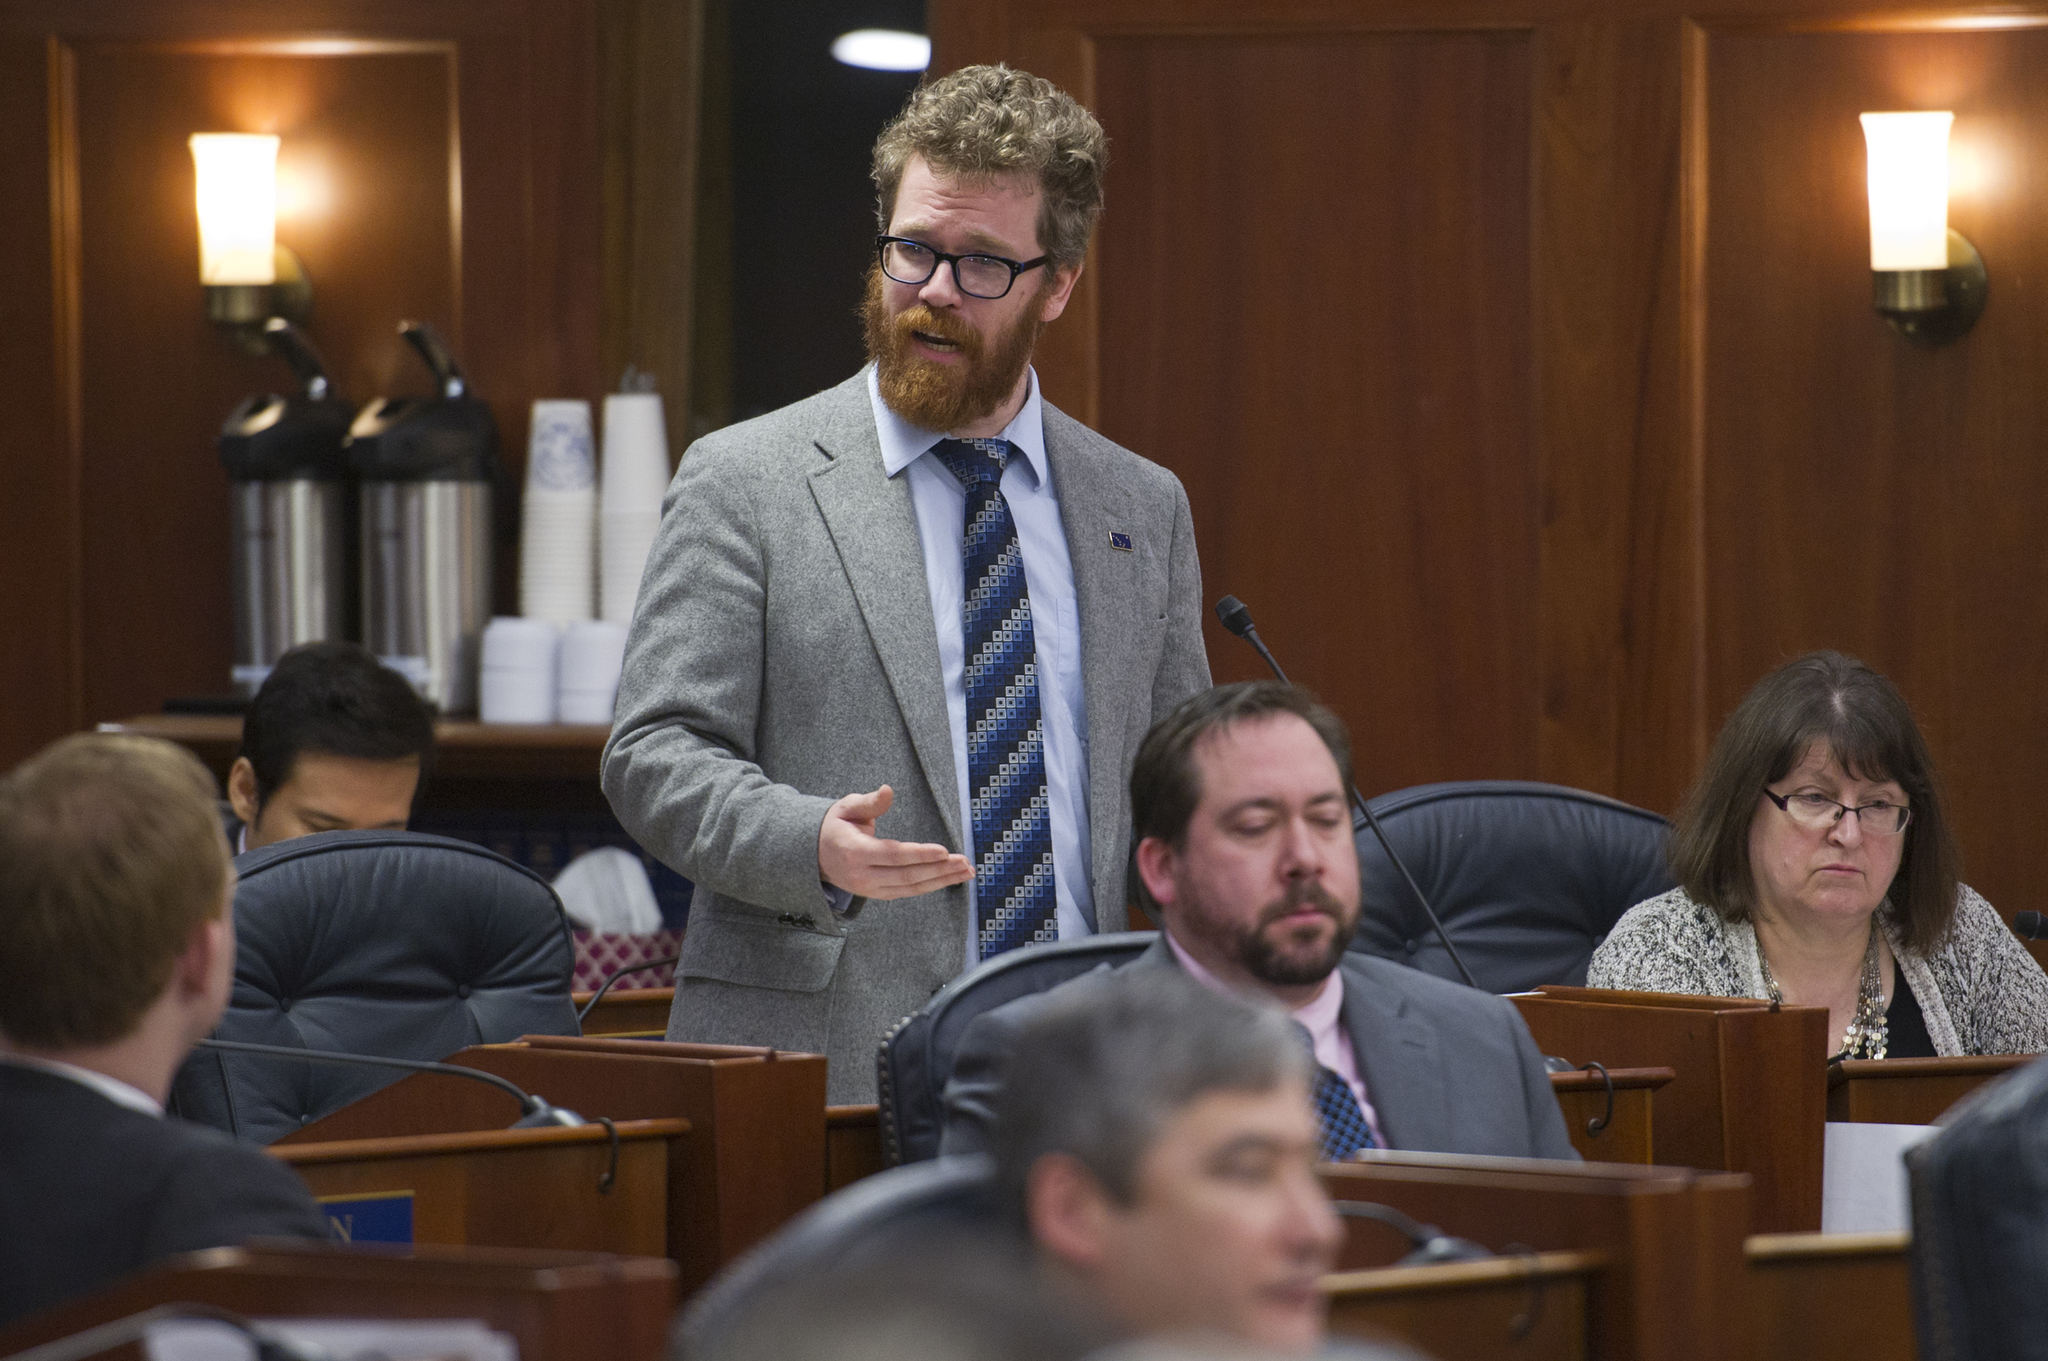 Rep. Justin Parish, D-Juneau, speaks against a resolution to allow oil drilling in the Arctic National Wildlife Refuge during a House floor sesison on Wednesday. The House voted in favor of the resolution. (Michael Penn | Juneau Empire)